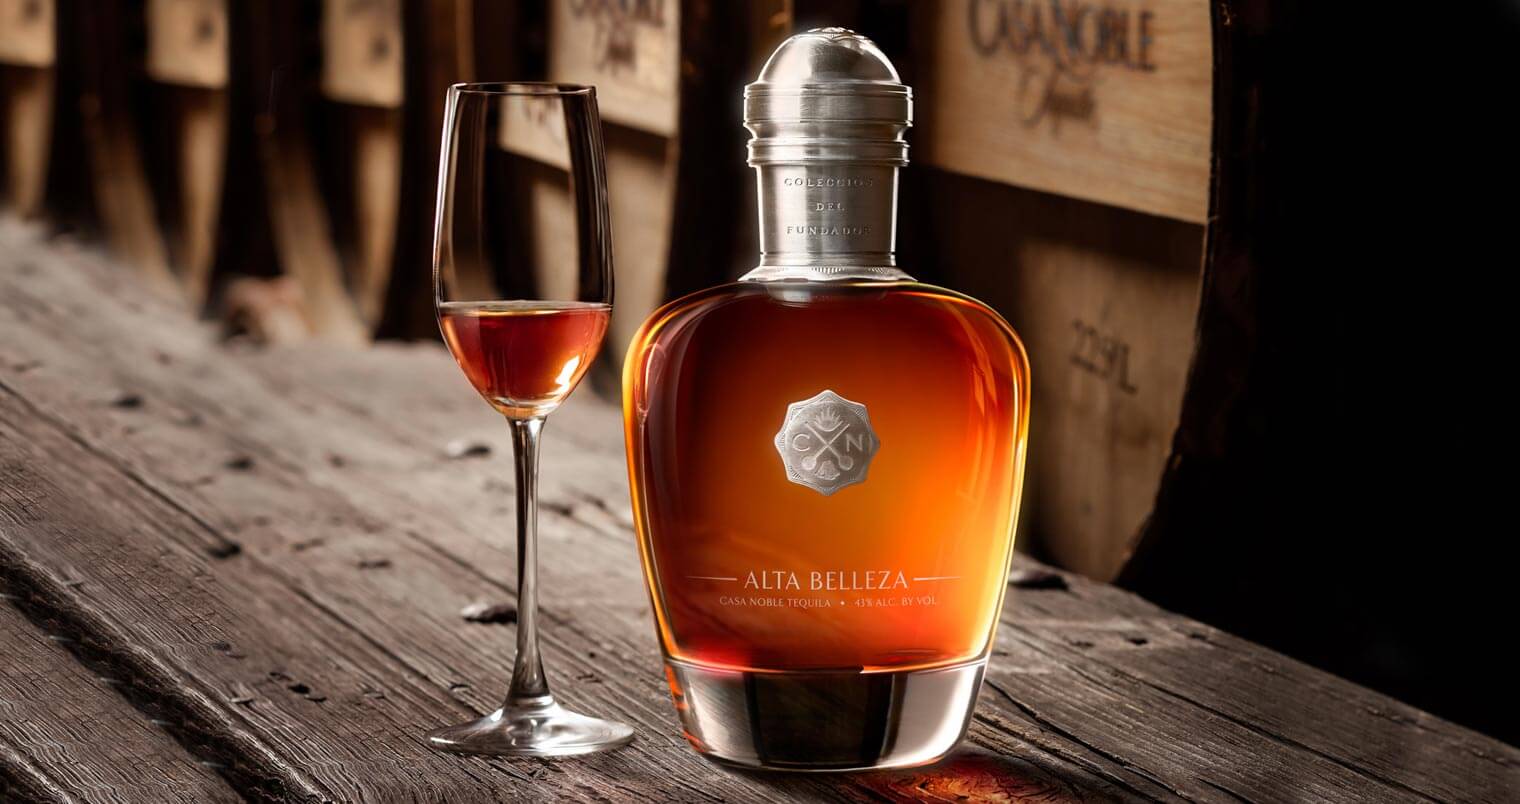 Casa Noble Releases Alta Belleza, Retailing for $1,200, featured image